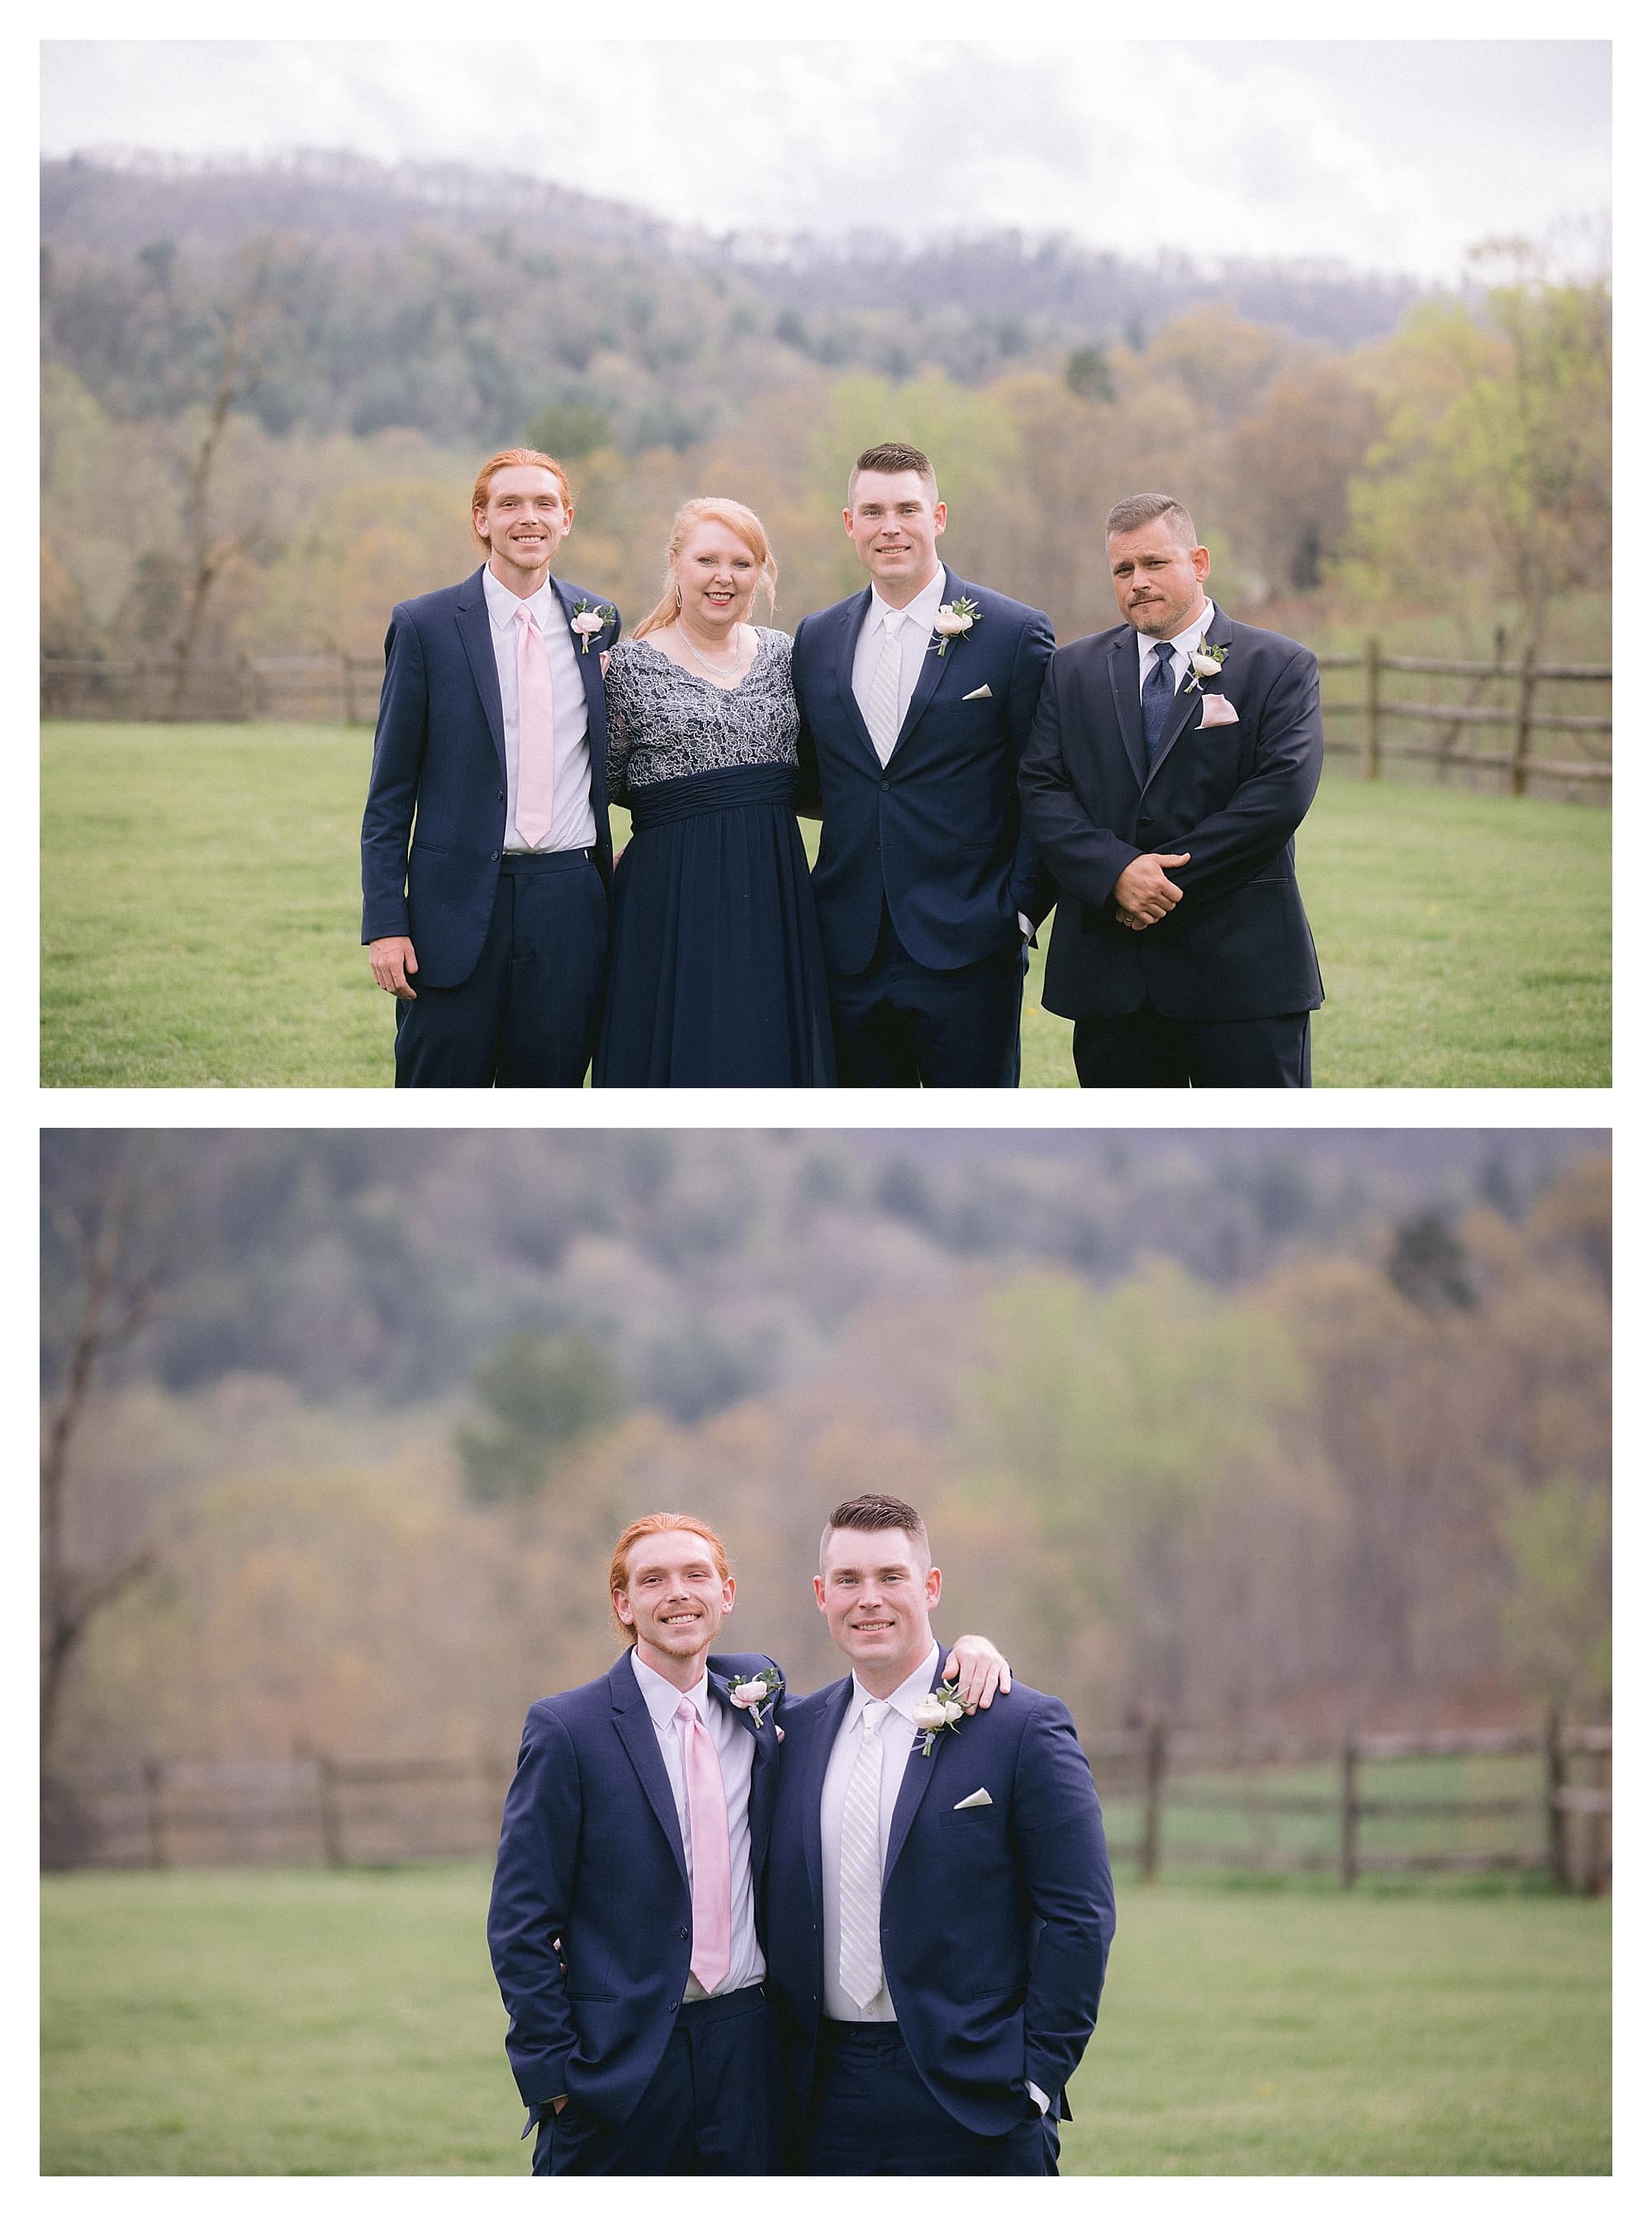 Groom posing with family in grassy field